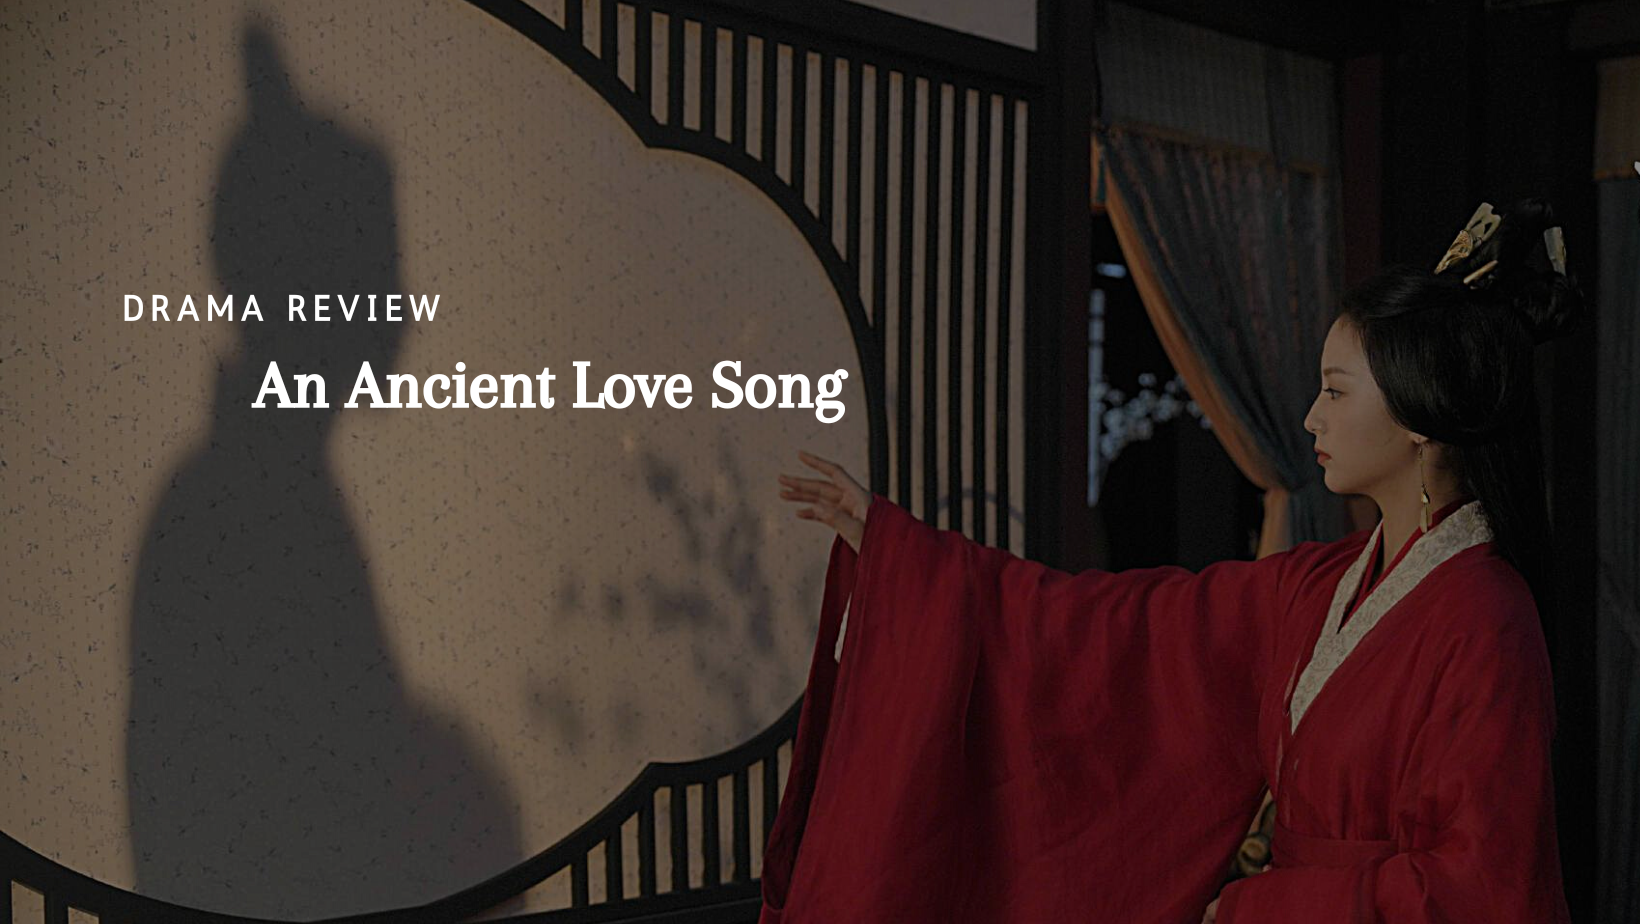 Drama Review: An Ancient Love Song